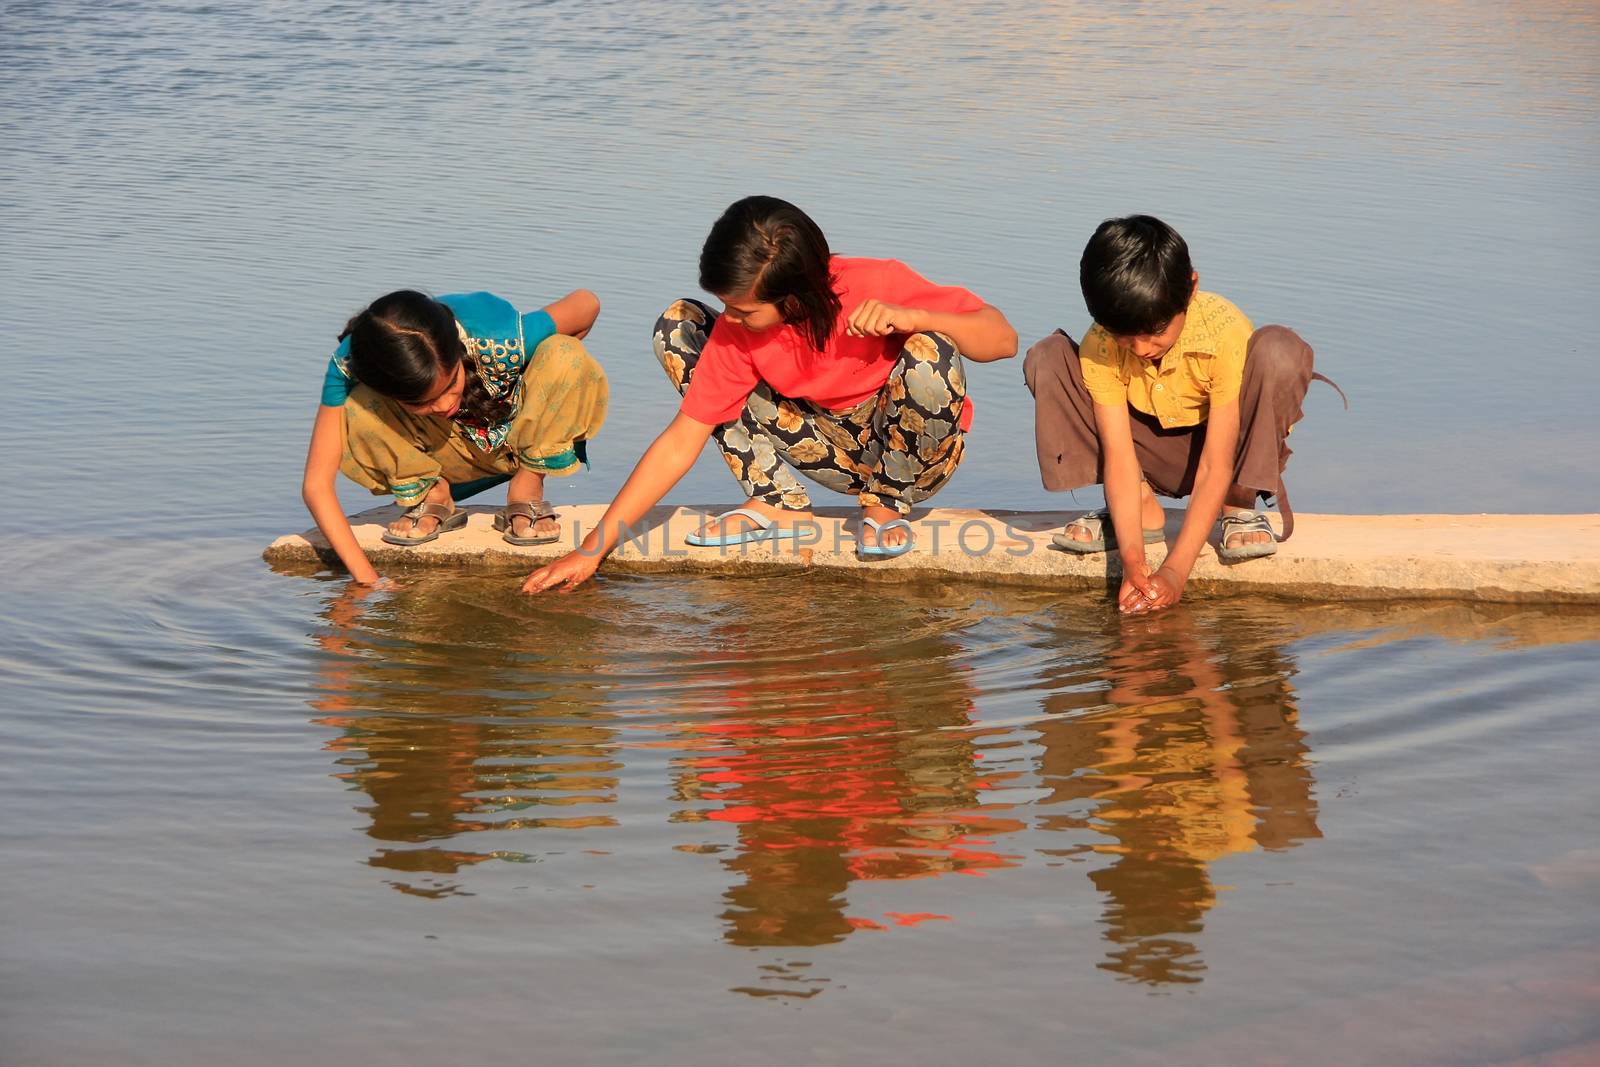 Local kids drinking from water reservoir, Khichan village, India by donya_nedomam